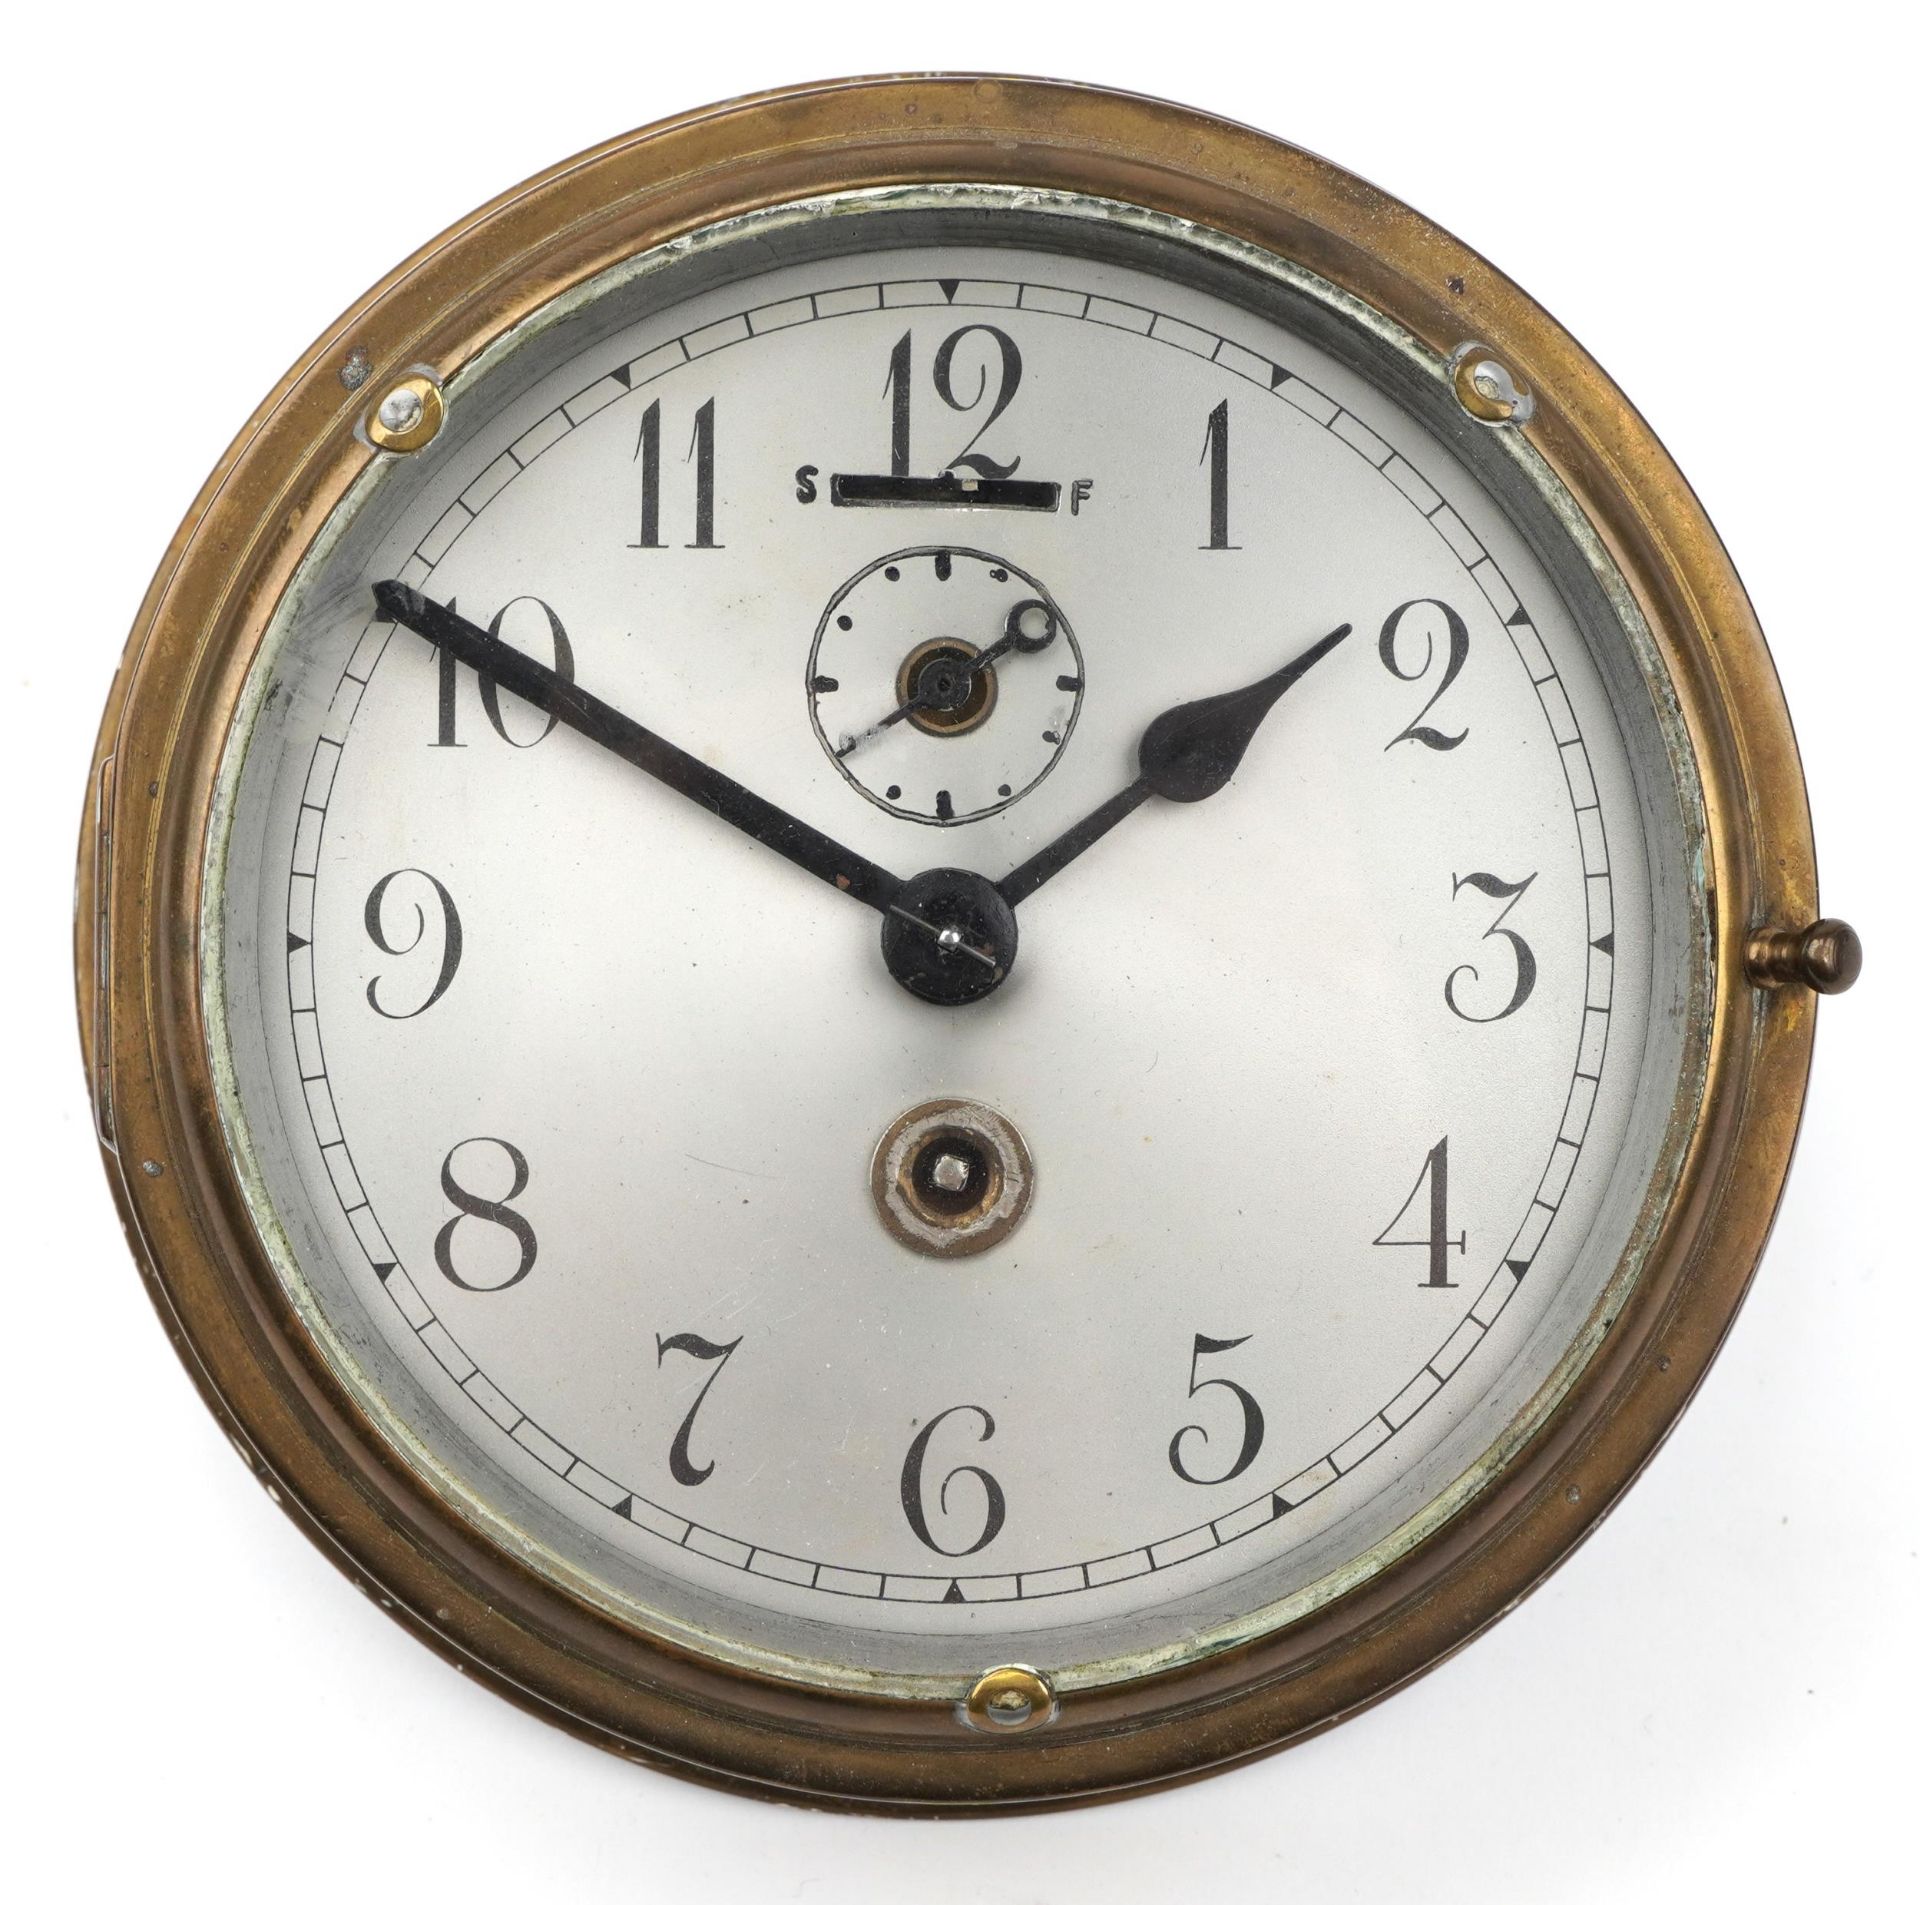 Brass ship's bulkhead design wall clock with silvered dial having Arabic numerals